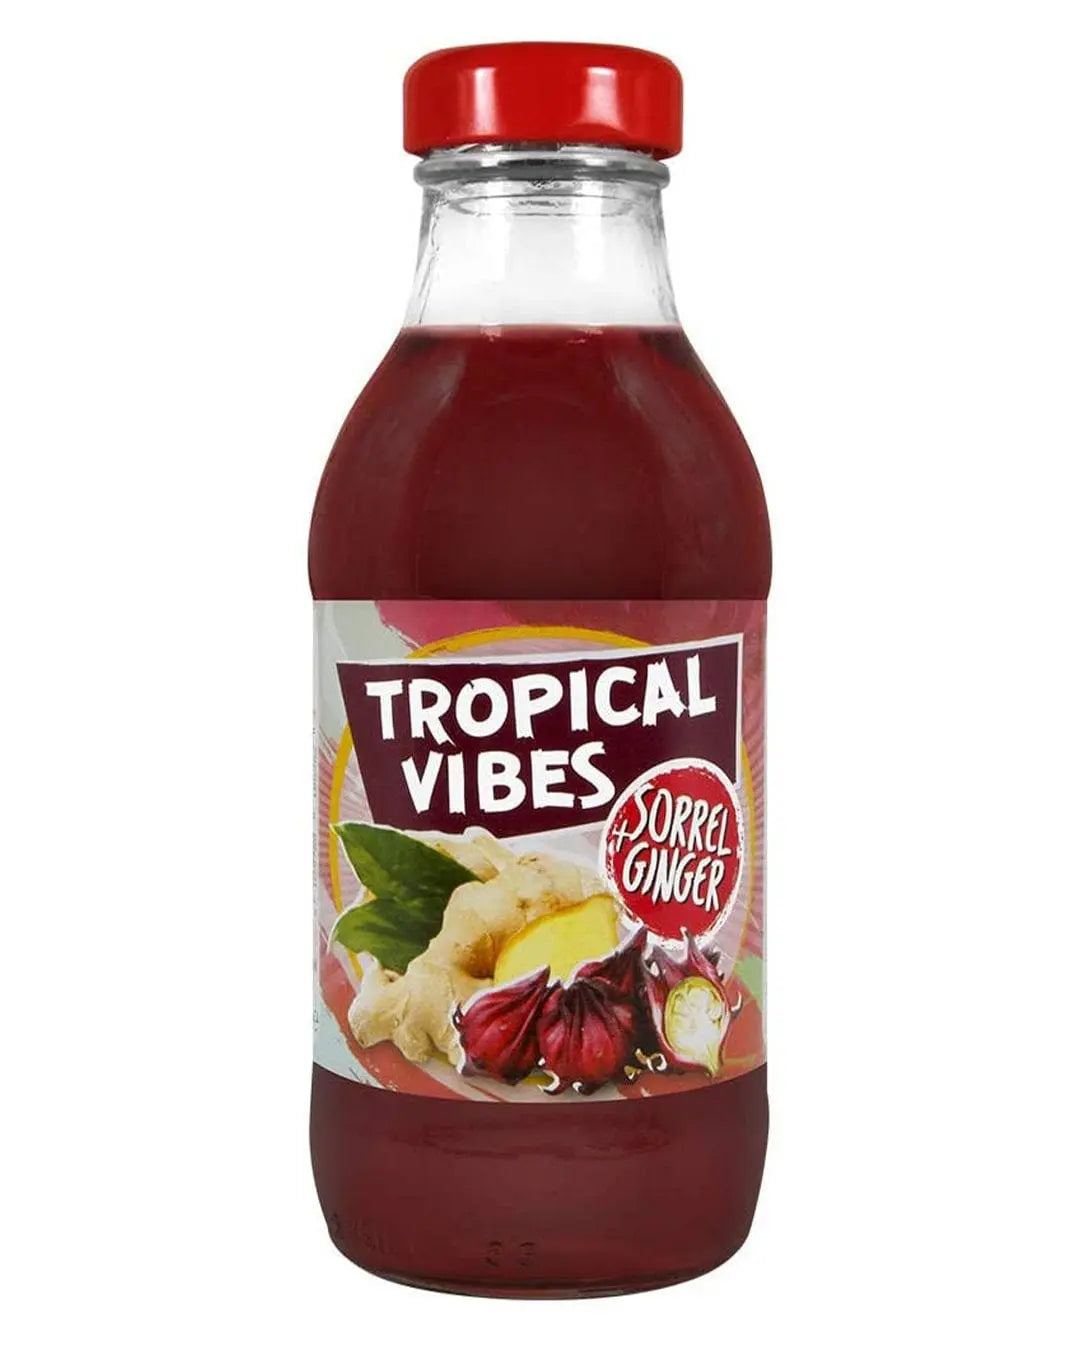 Tropical Vibes Sorrel & Ginger Drink Multipack, 15 x 300 ml Soft Drinks & Mixers